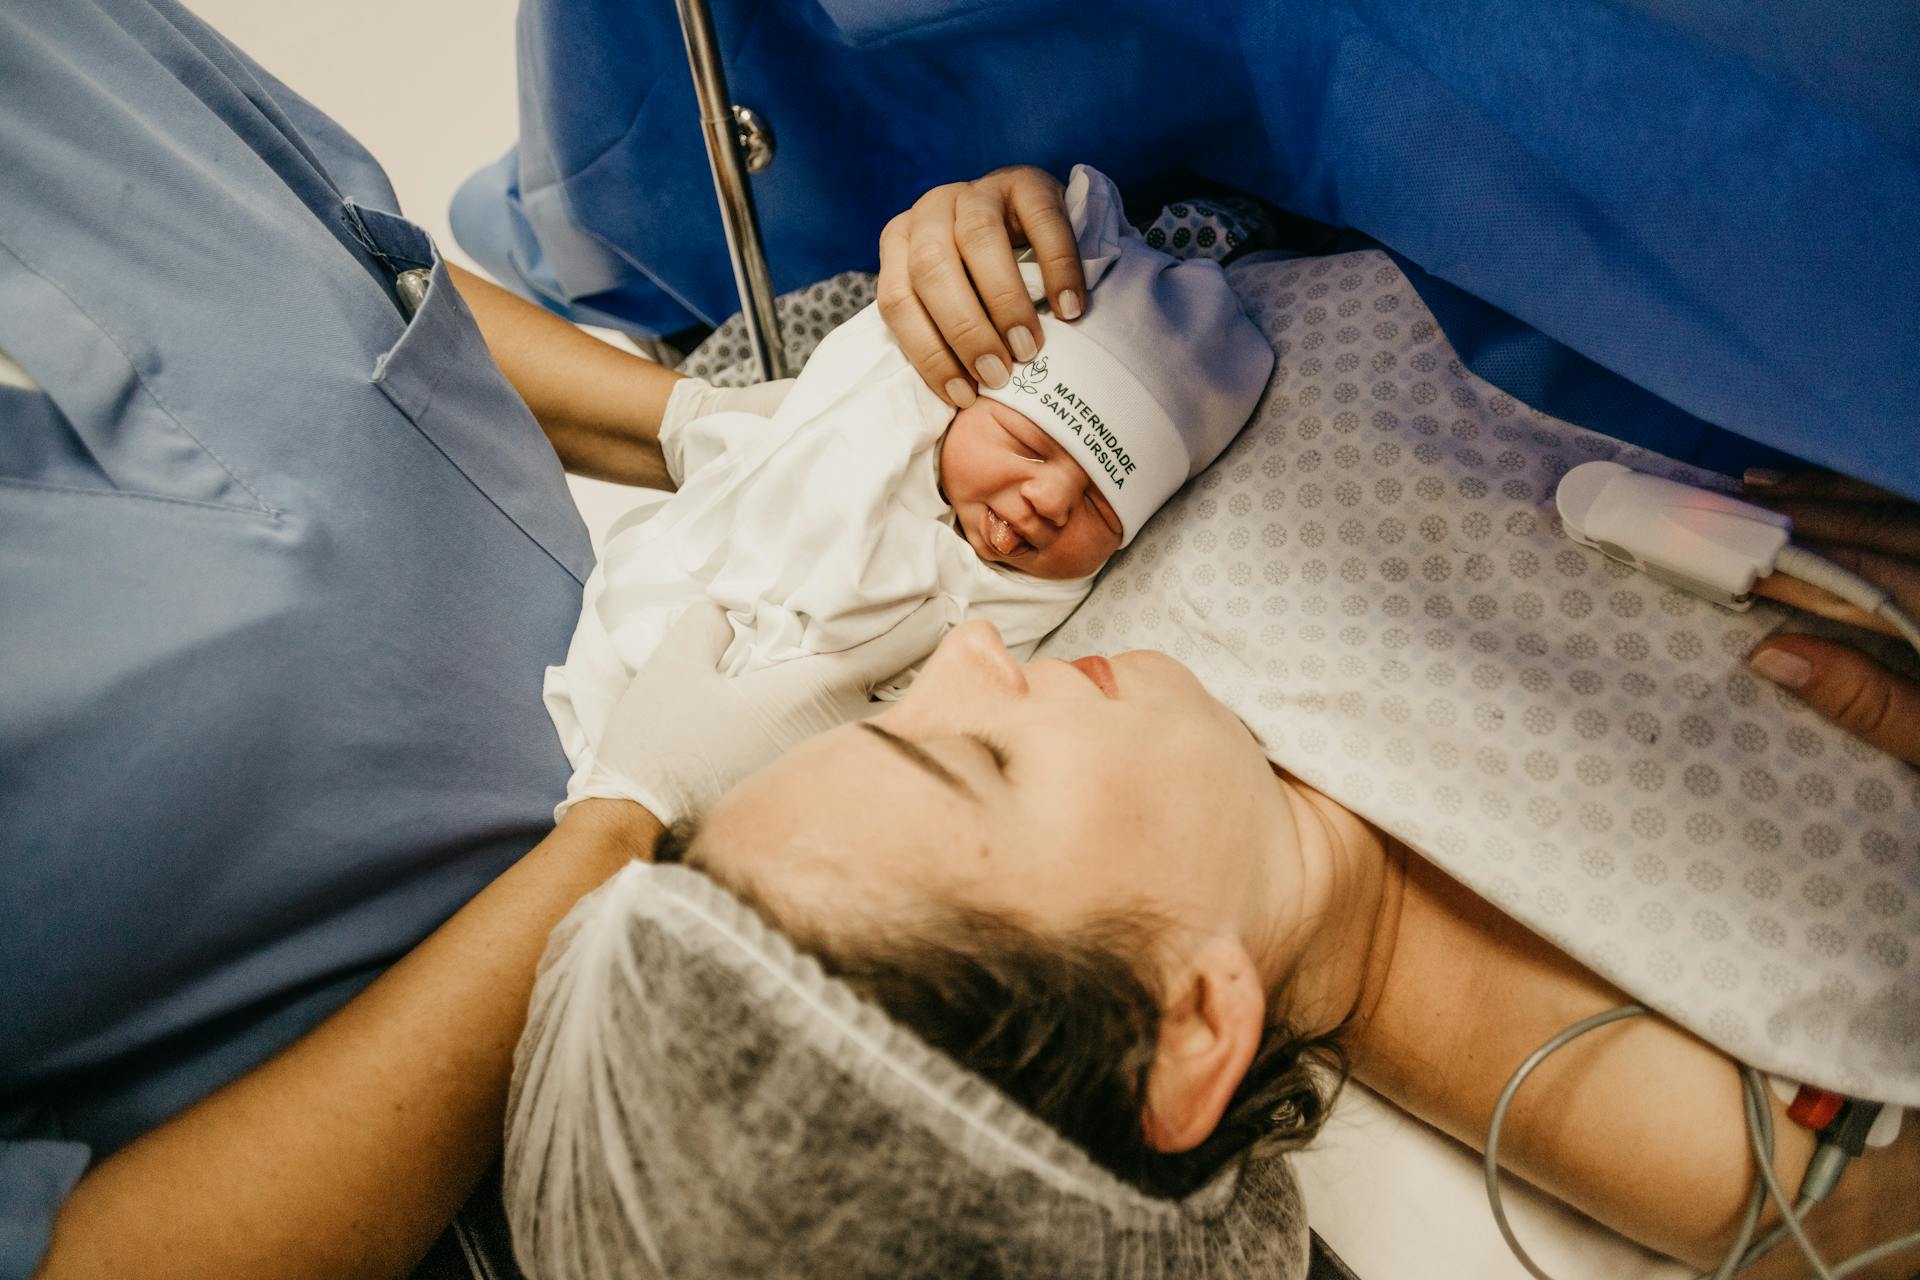 A woman's newborn baby placed on her chest after delivery | Source: Pexels